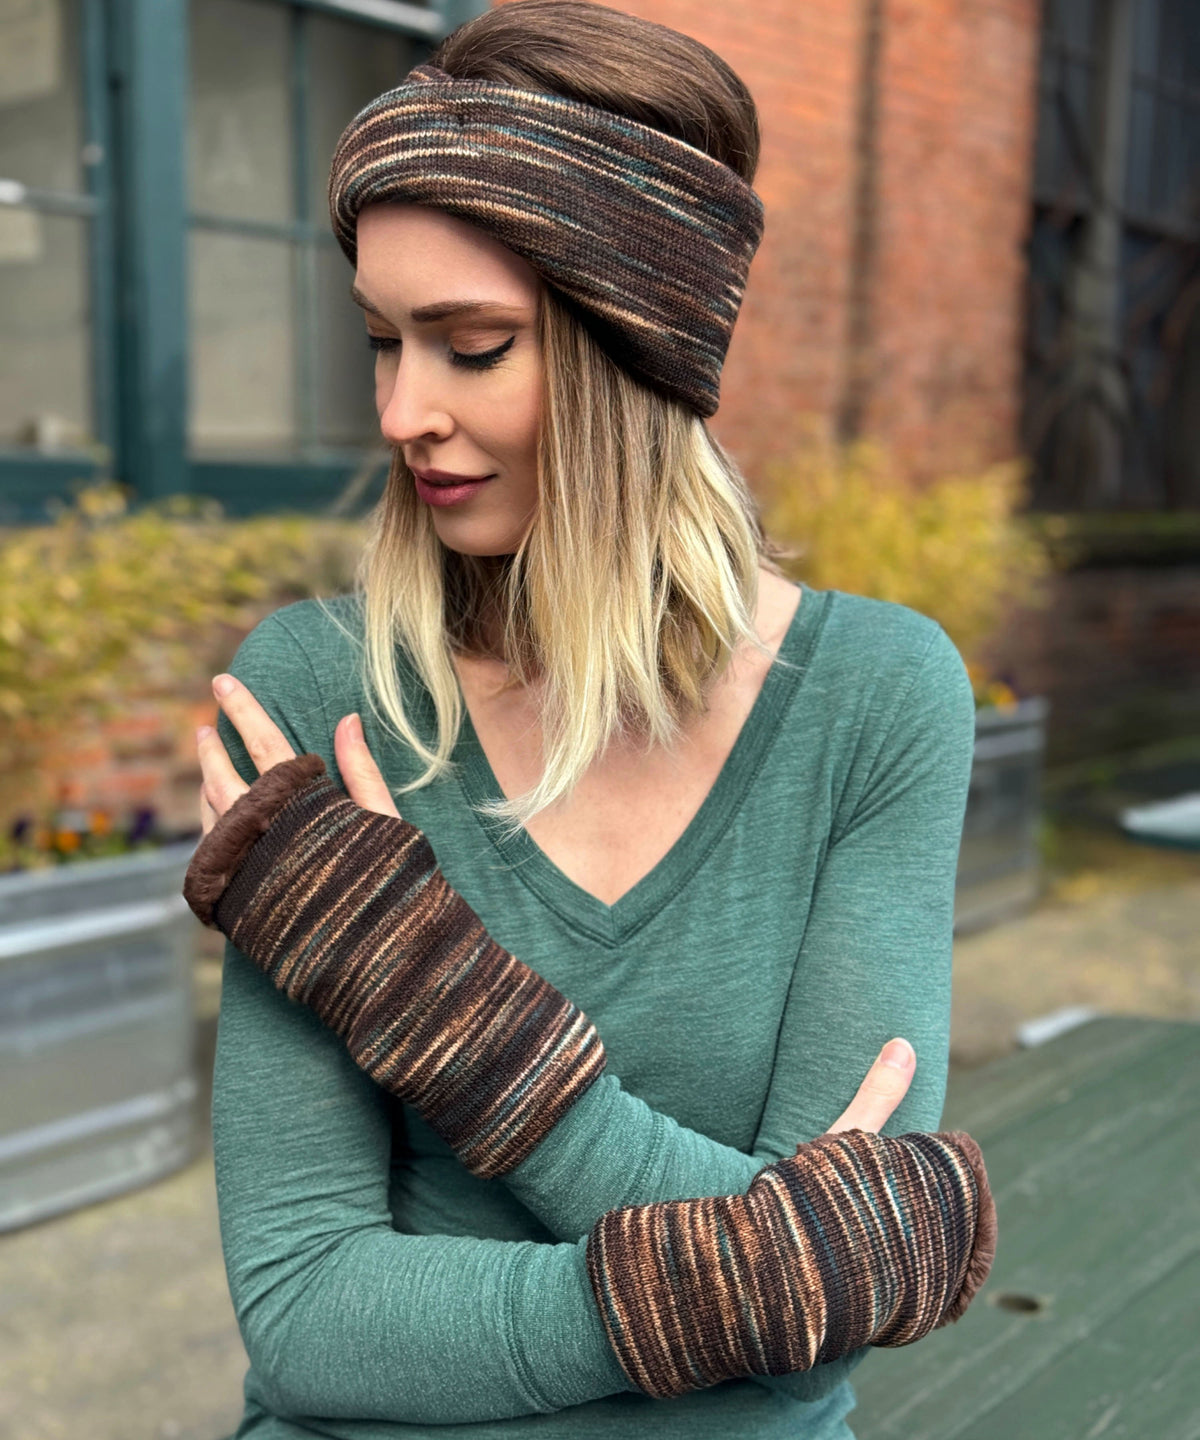 Model wearing Reversible Fingerless Gloves | Sweet Stripes in English Toffee with Cuddly Chocolate Faux Fur | Pandemonium Millinery